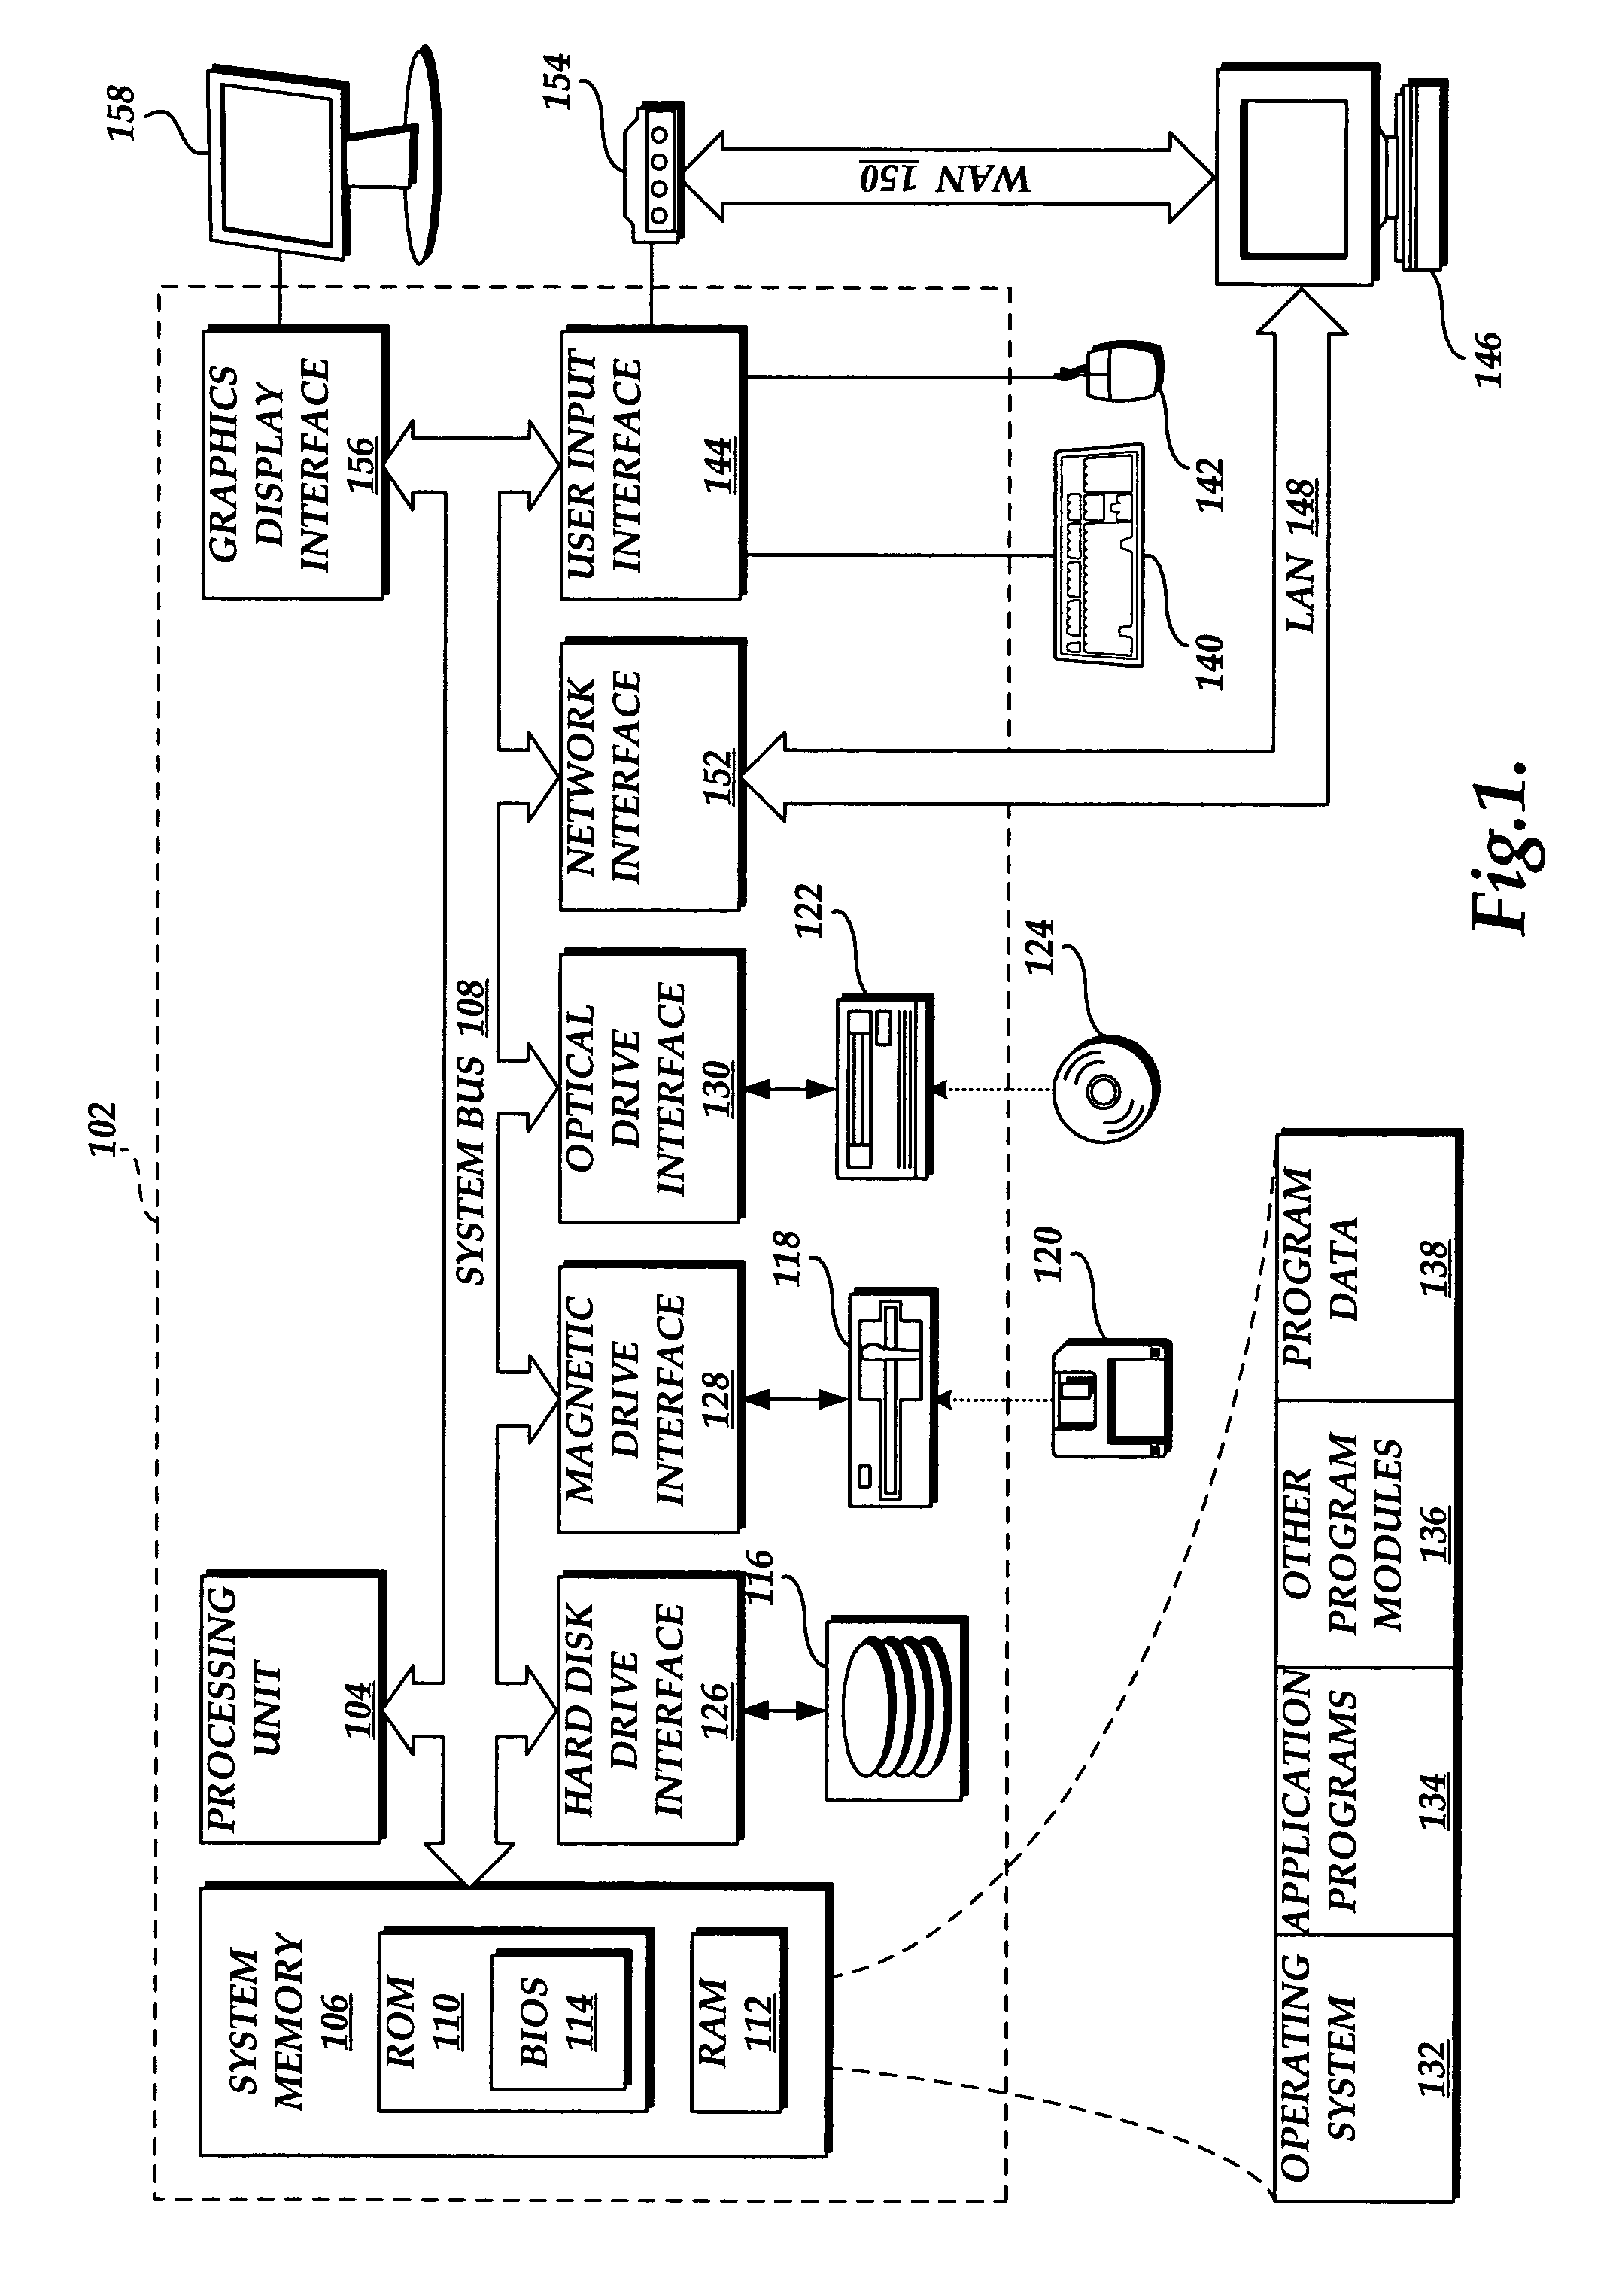 System and method for deploying a software build from a plurality of software builds to a target computer